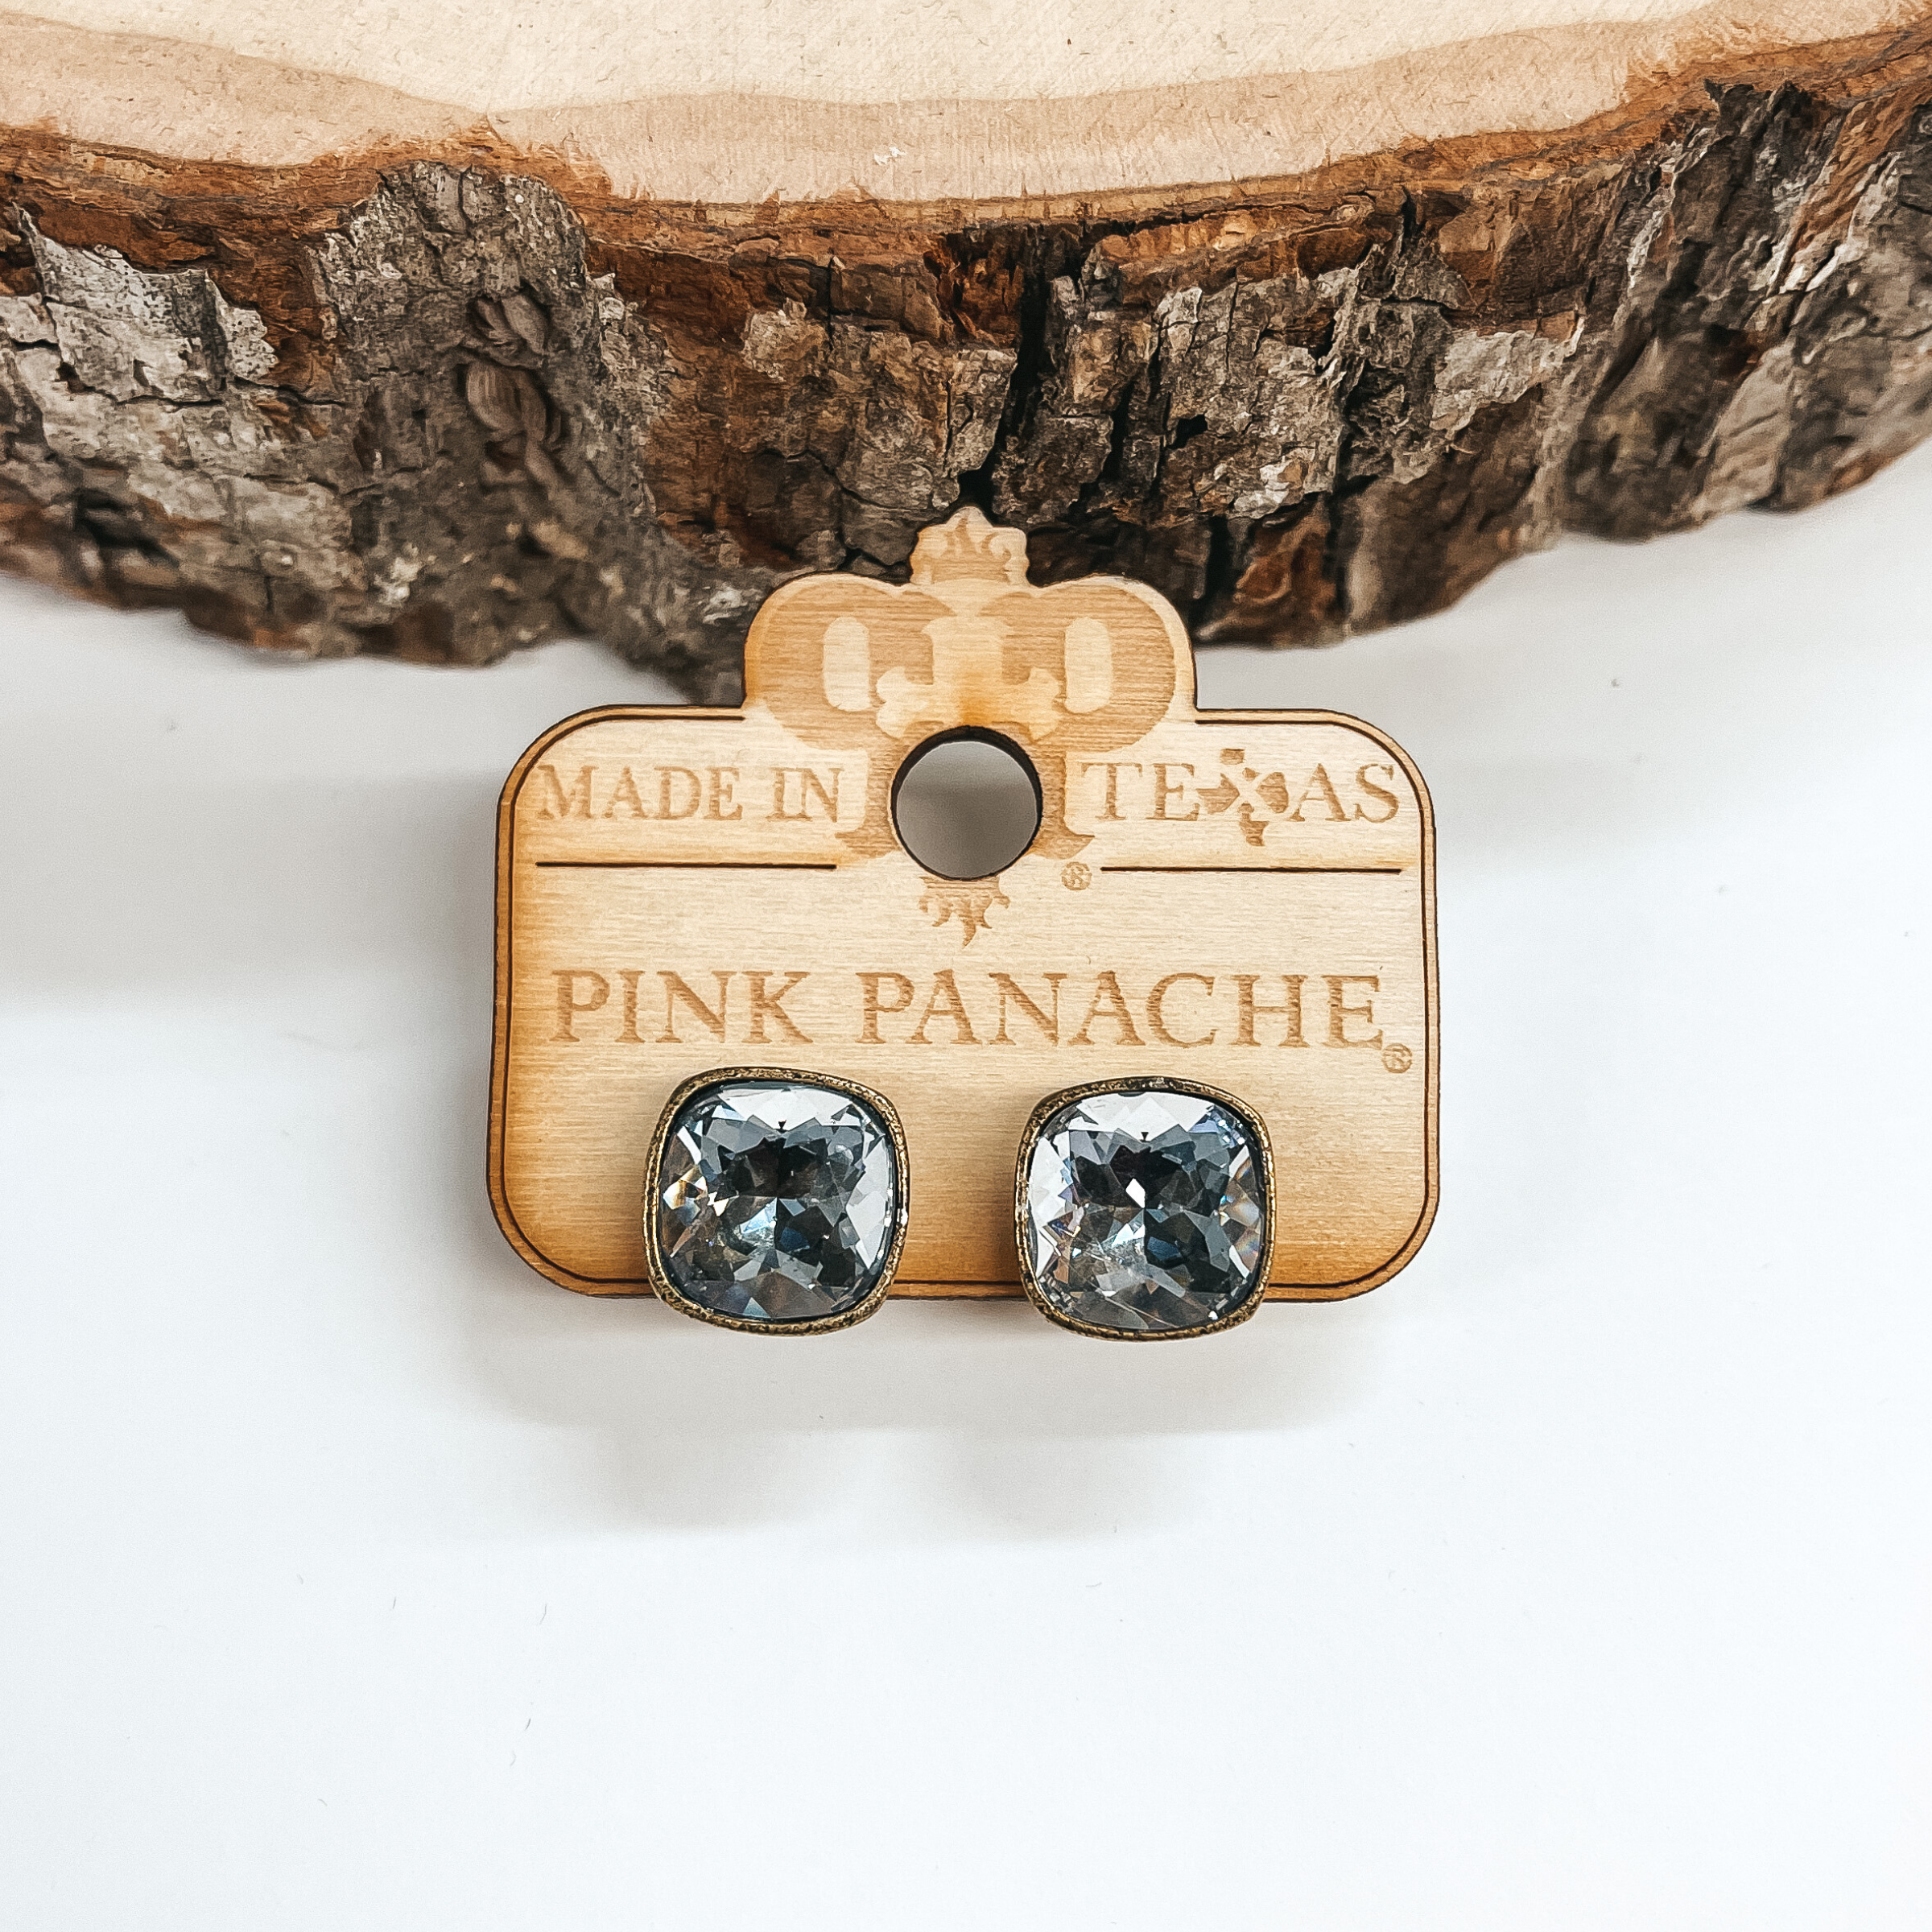 These are cushion cut crystal ignite stud earrings  in a bronze setting. These earrings are taken on a  white background and leaned up against a piece of wood. 